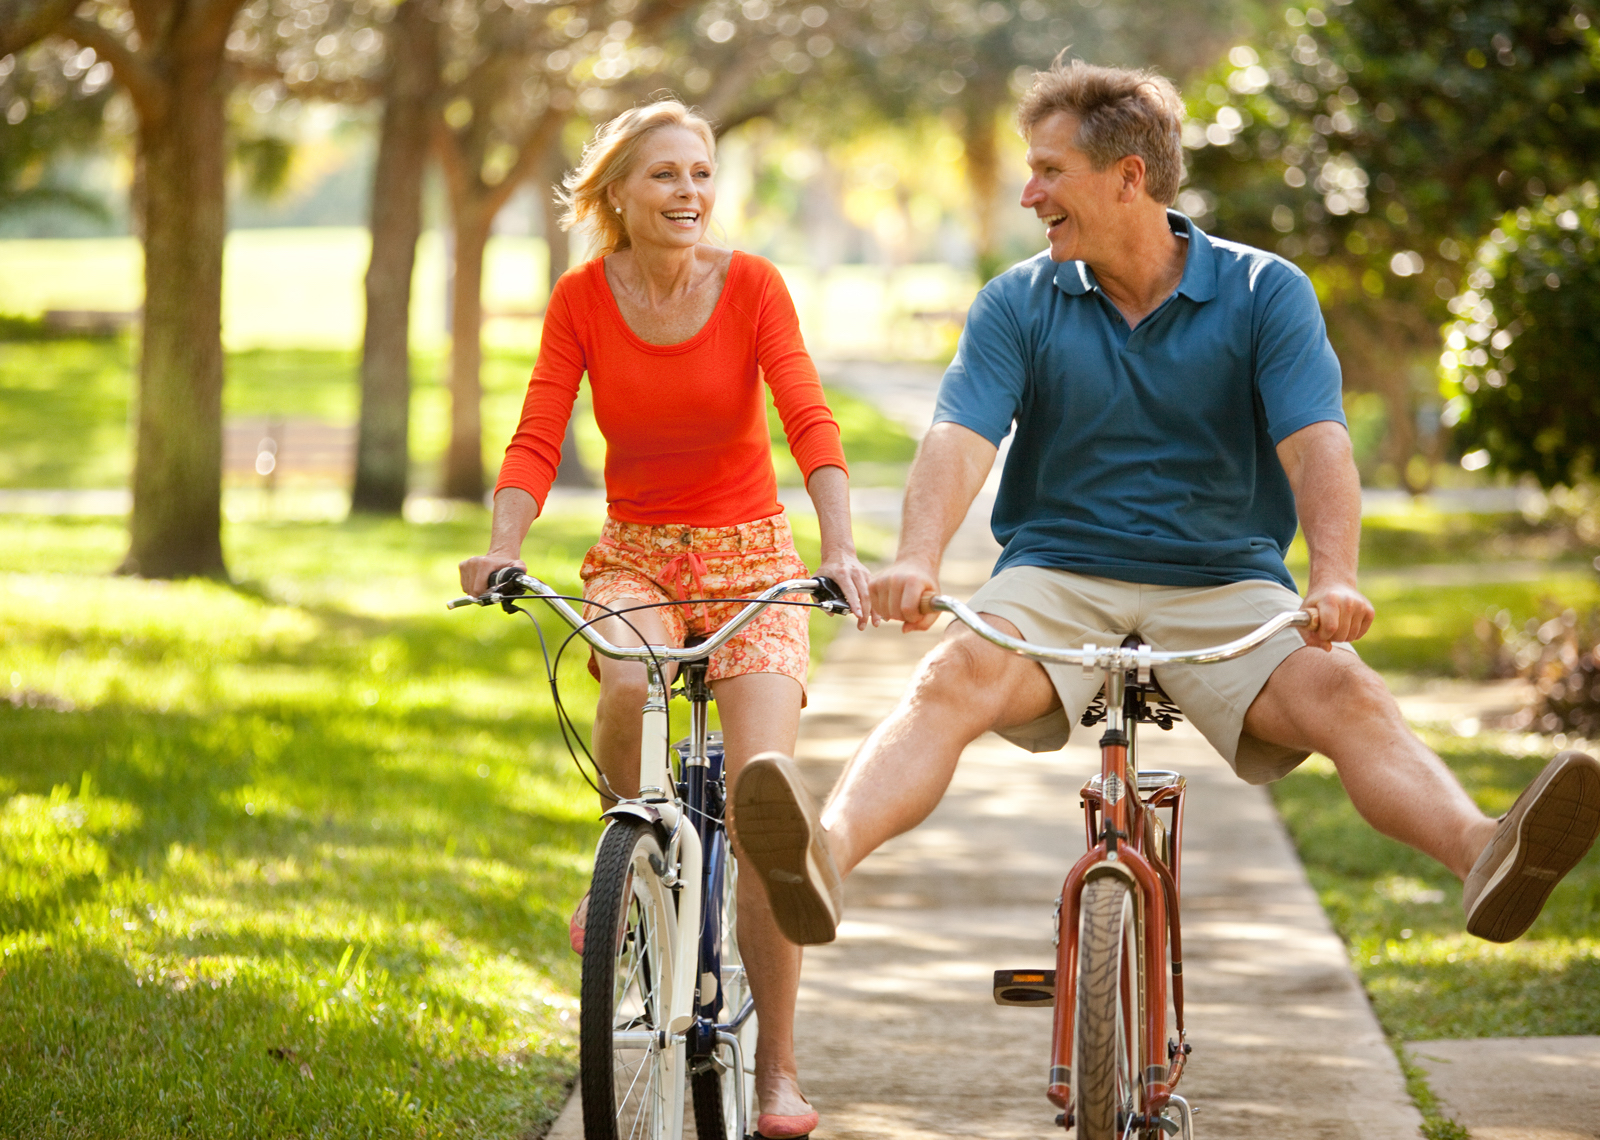 Can We Guess Your Age Based on the Decisions You Make on a Typical Day? cycling riding bikes